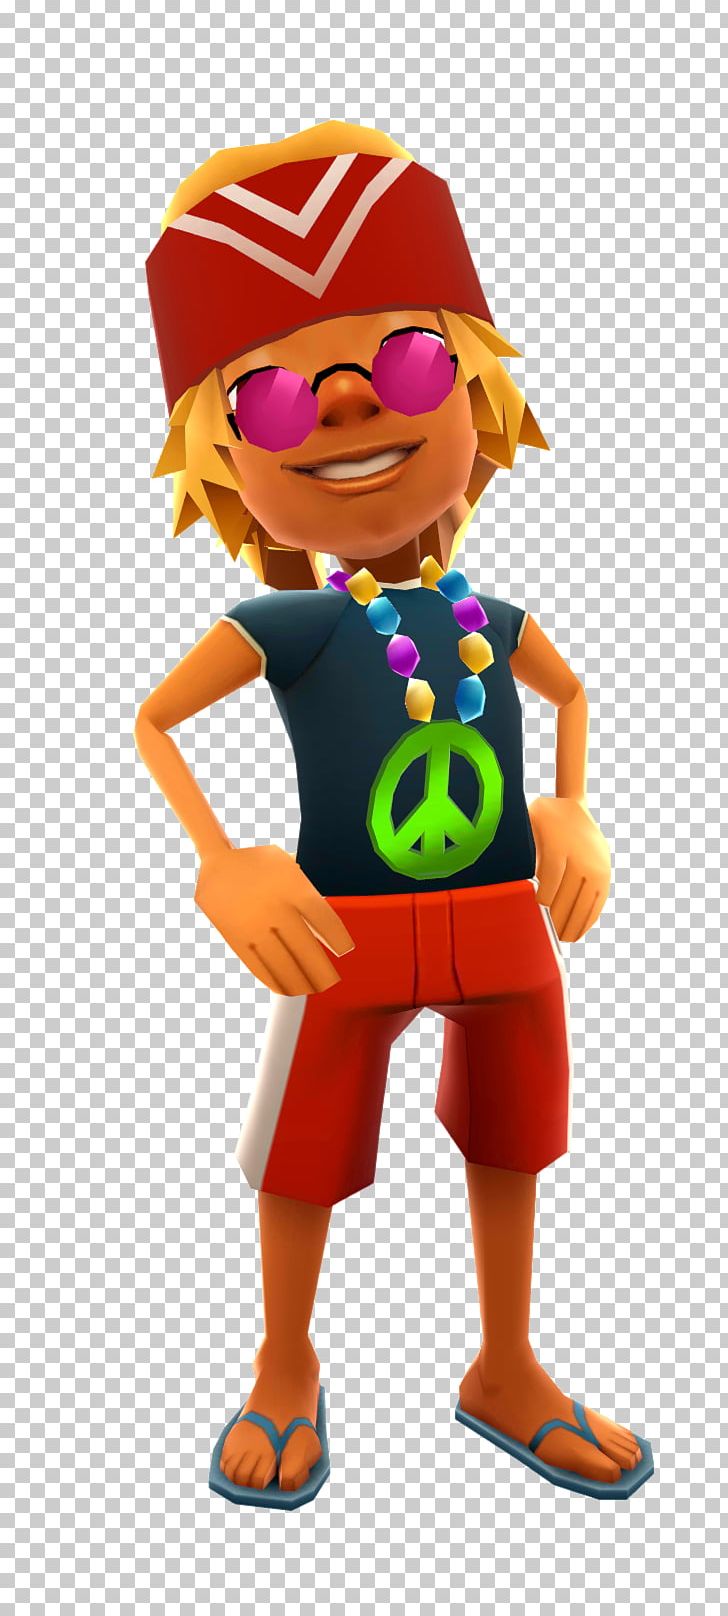 Subway Surfers Character Brody Posh PNG, Clipart, Brody, Brody Posh, Character, Coco, Com Free PNG Download